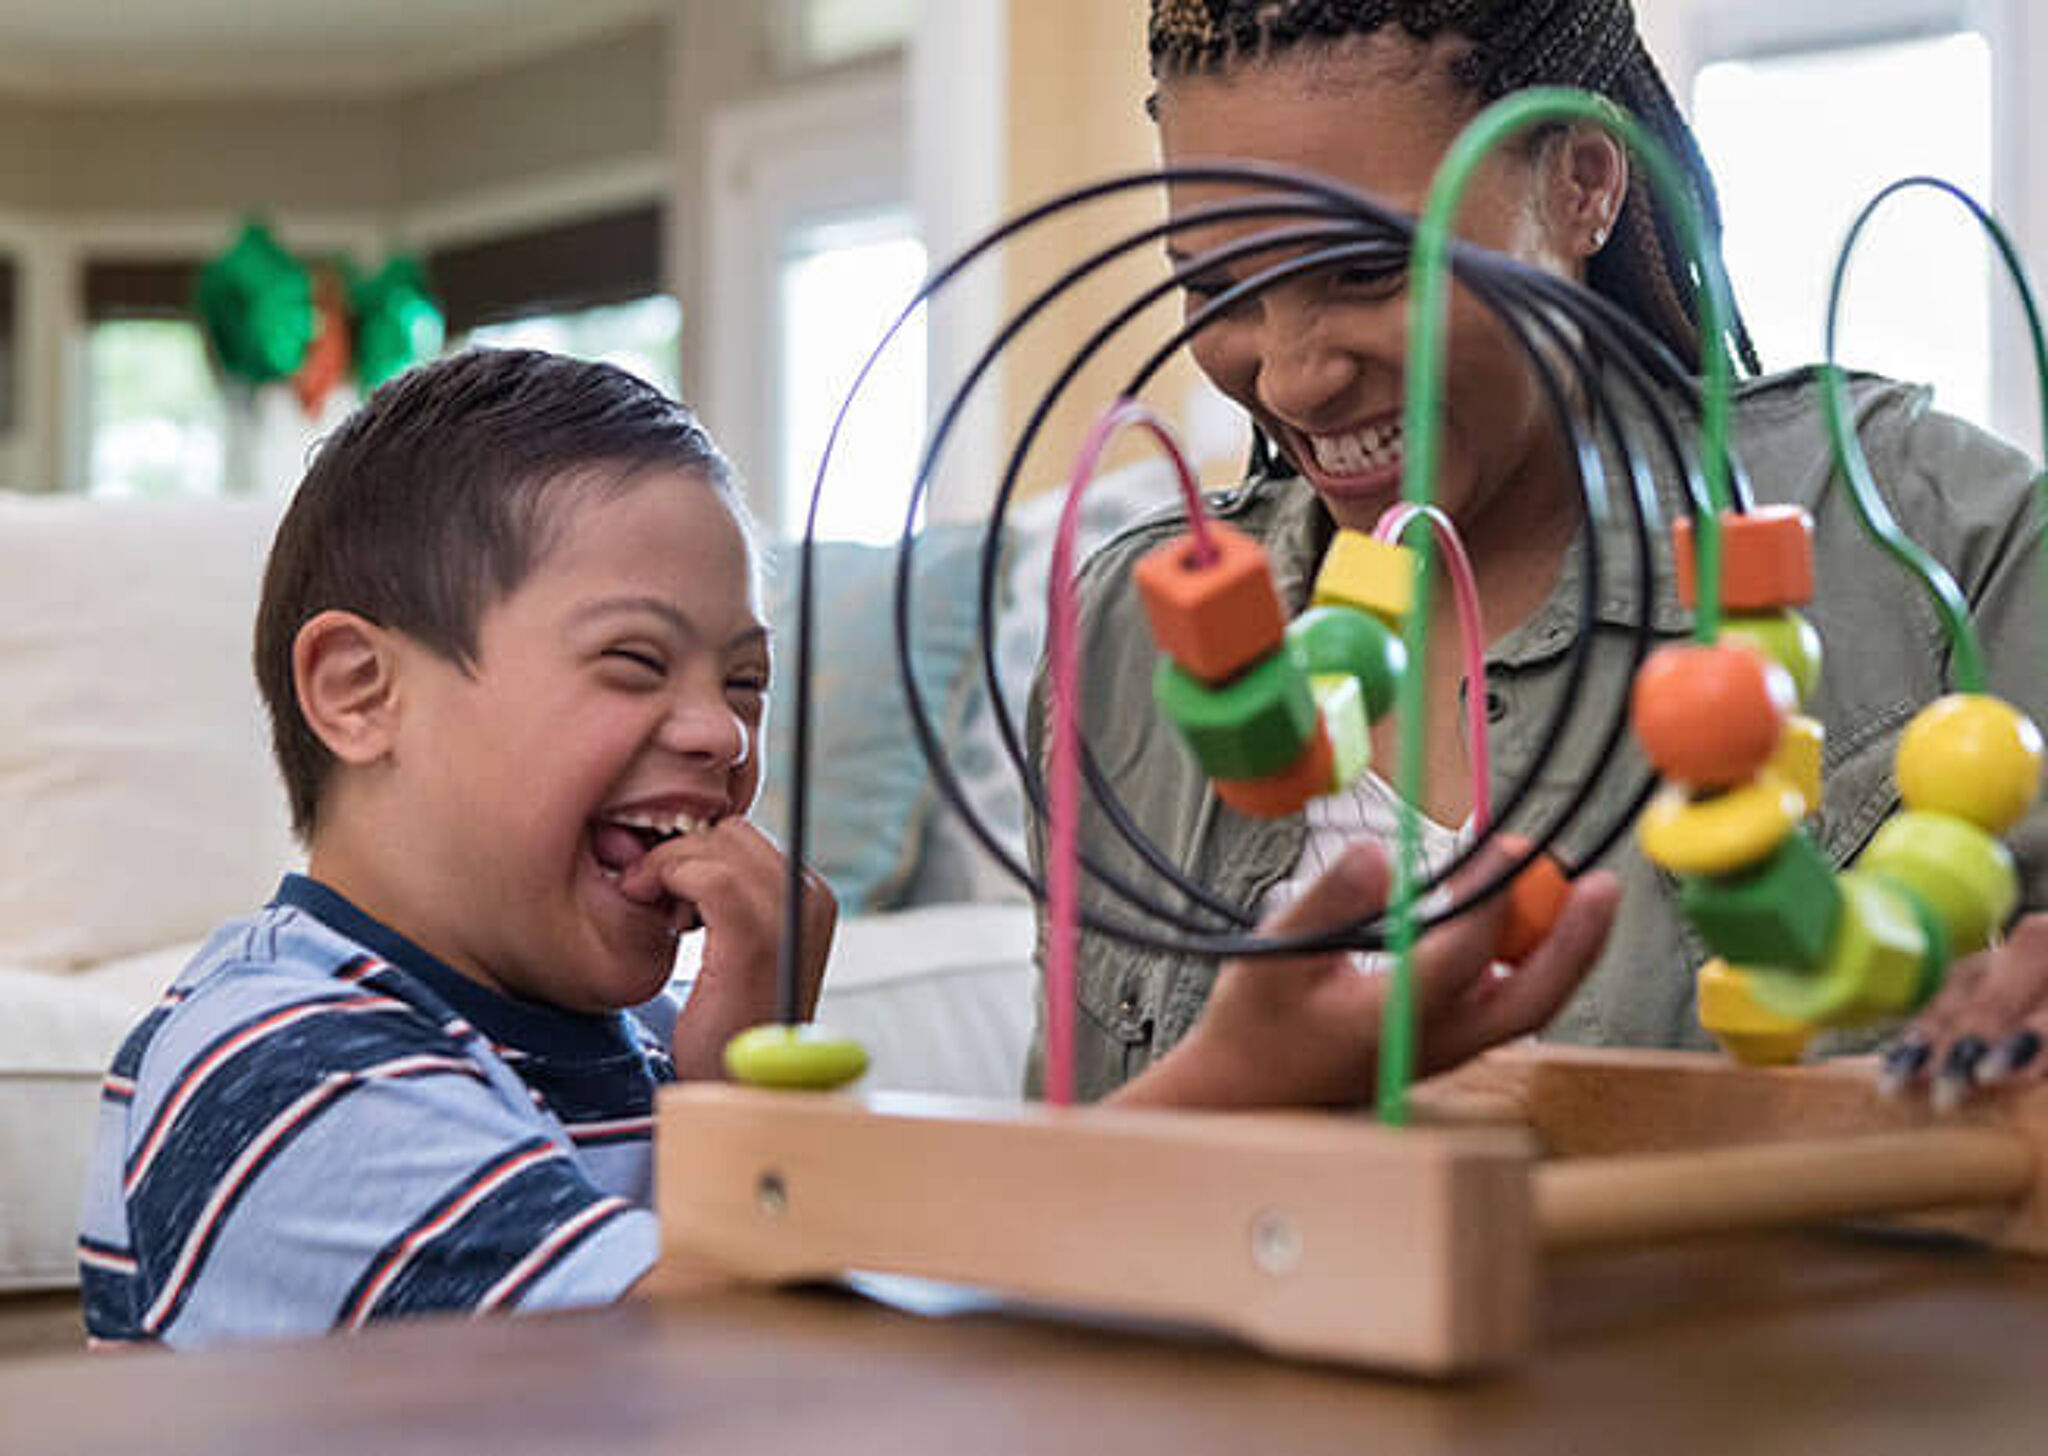 Children's laughter and play during an engaging educational activity.